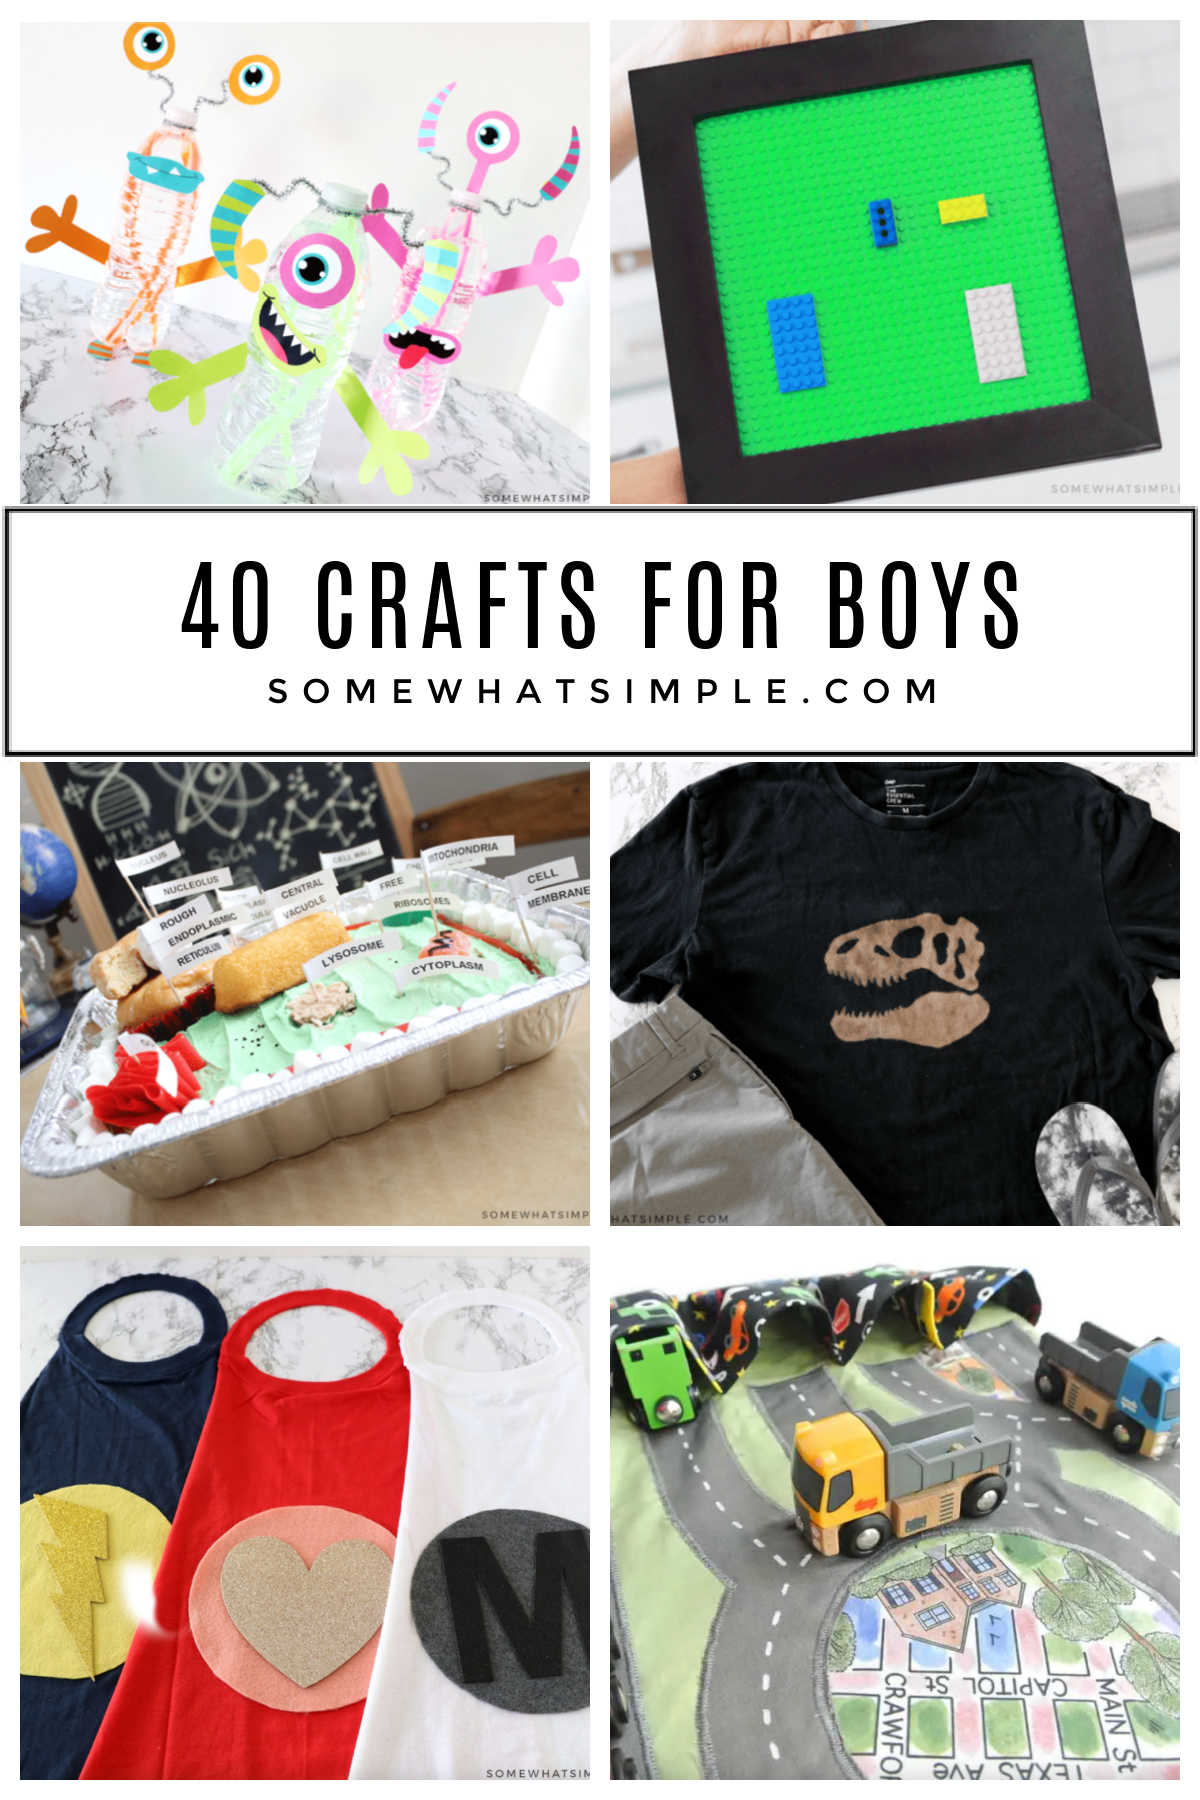 From Catapults to Light Sabers and everything in between, here are 40 crafts for boys that are a great way to spend the afternoon! via @somewhatsimple